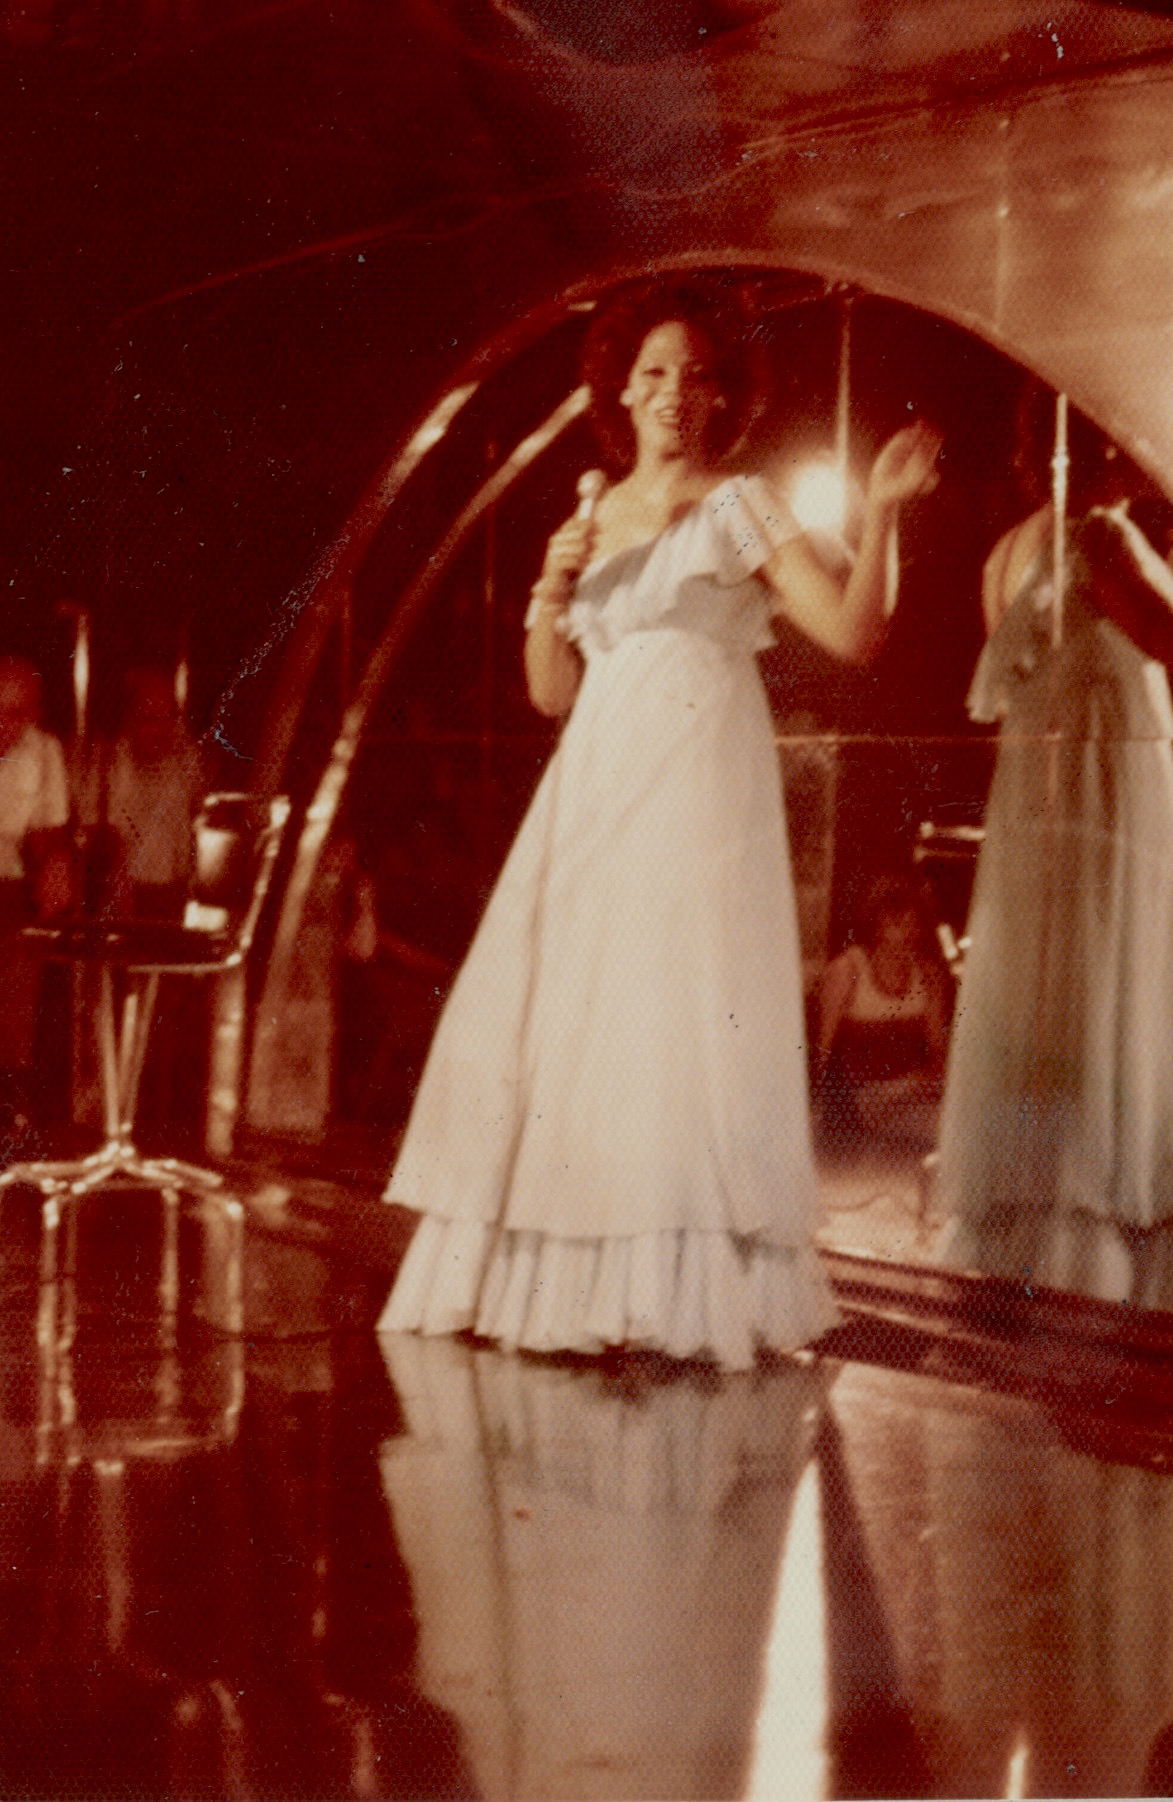 Miss Major performing at the Guilded Grape in New York City in the 1970s. Photo courtesy of Miss Major Griffin-Gracy.